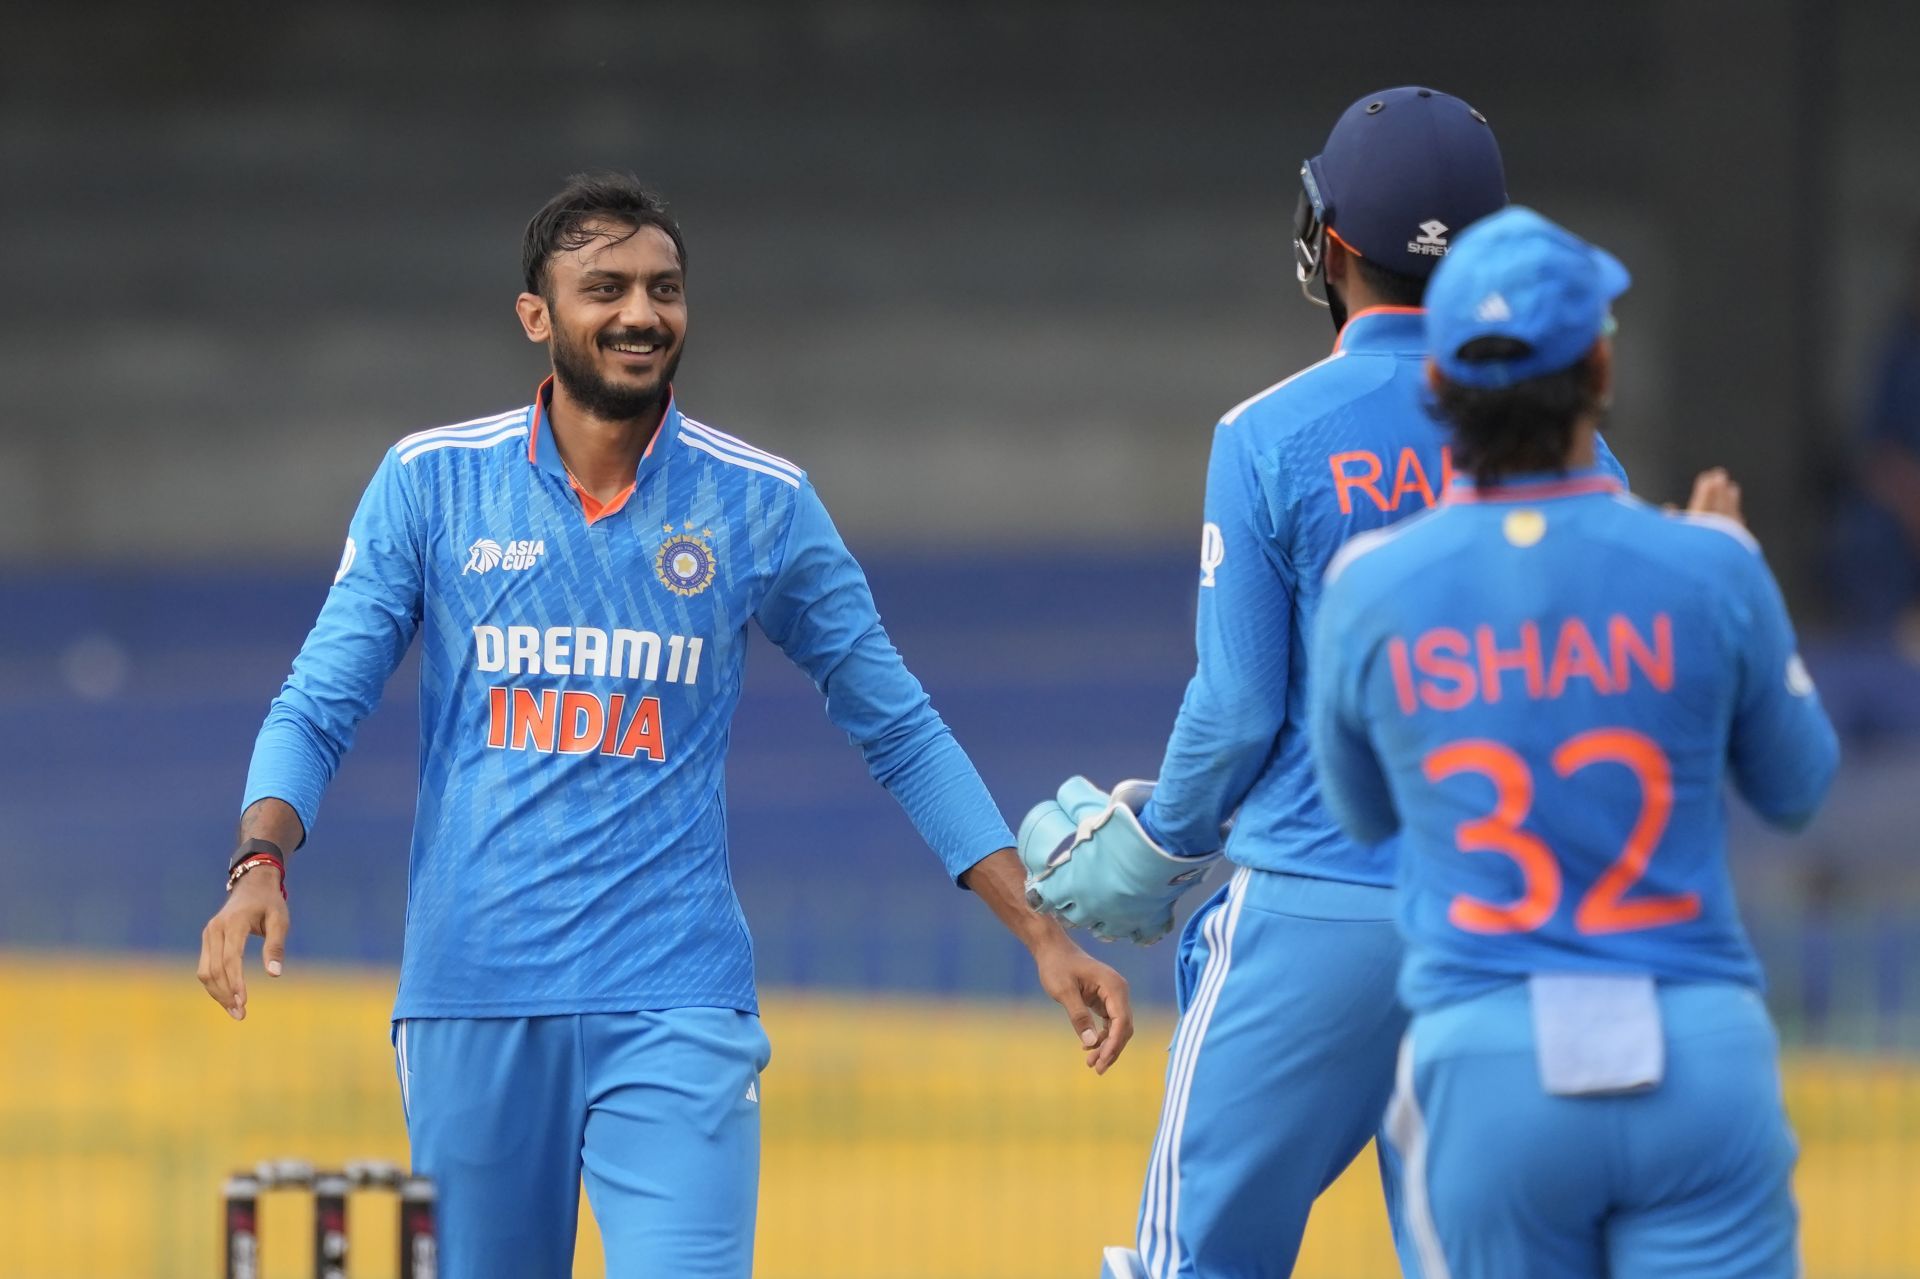 Axar Patel (left) suffered a left quadricep strain during the Asia Cup. (Pic: AP)